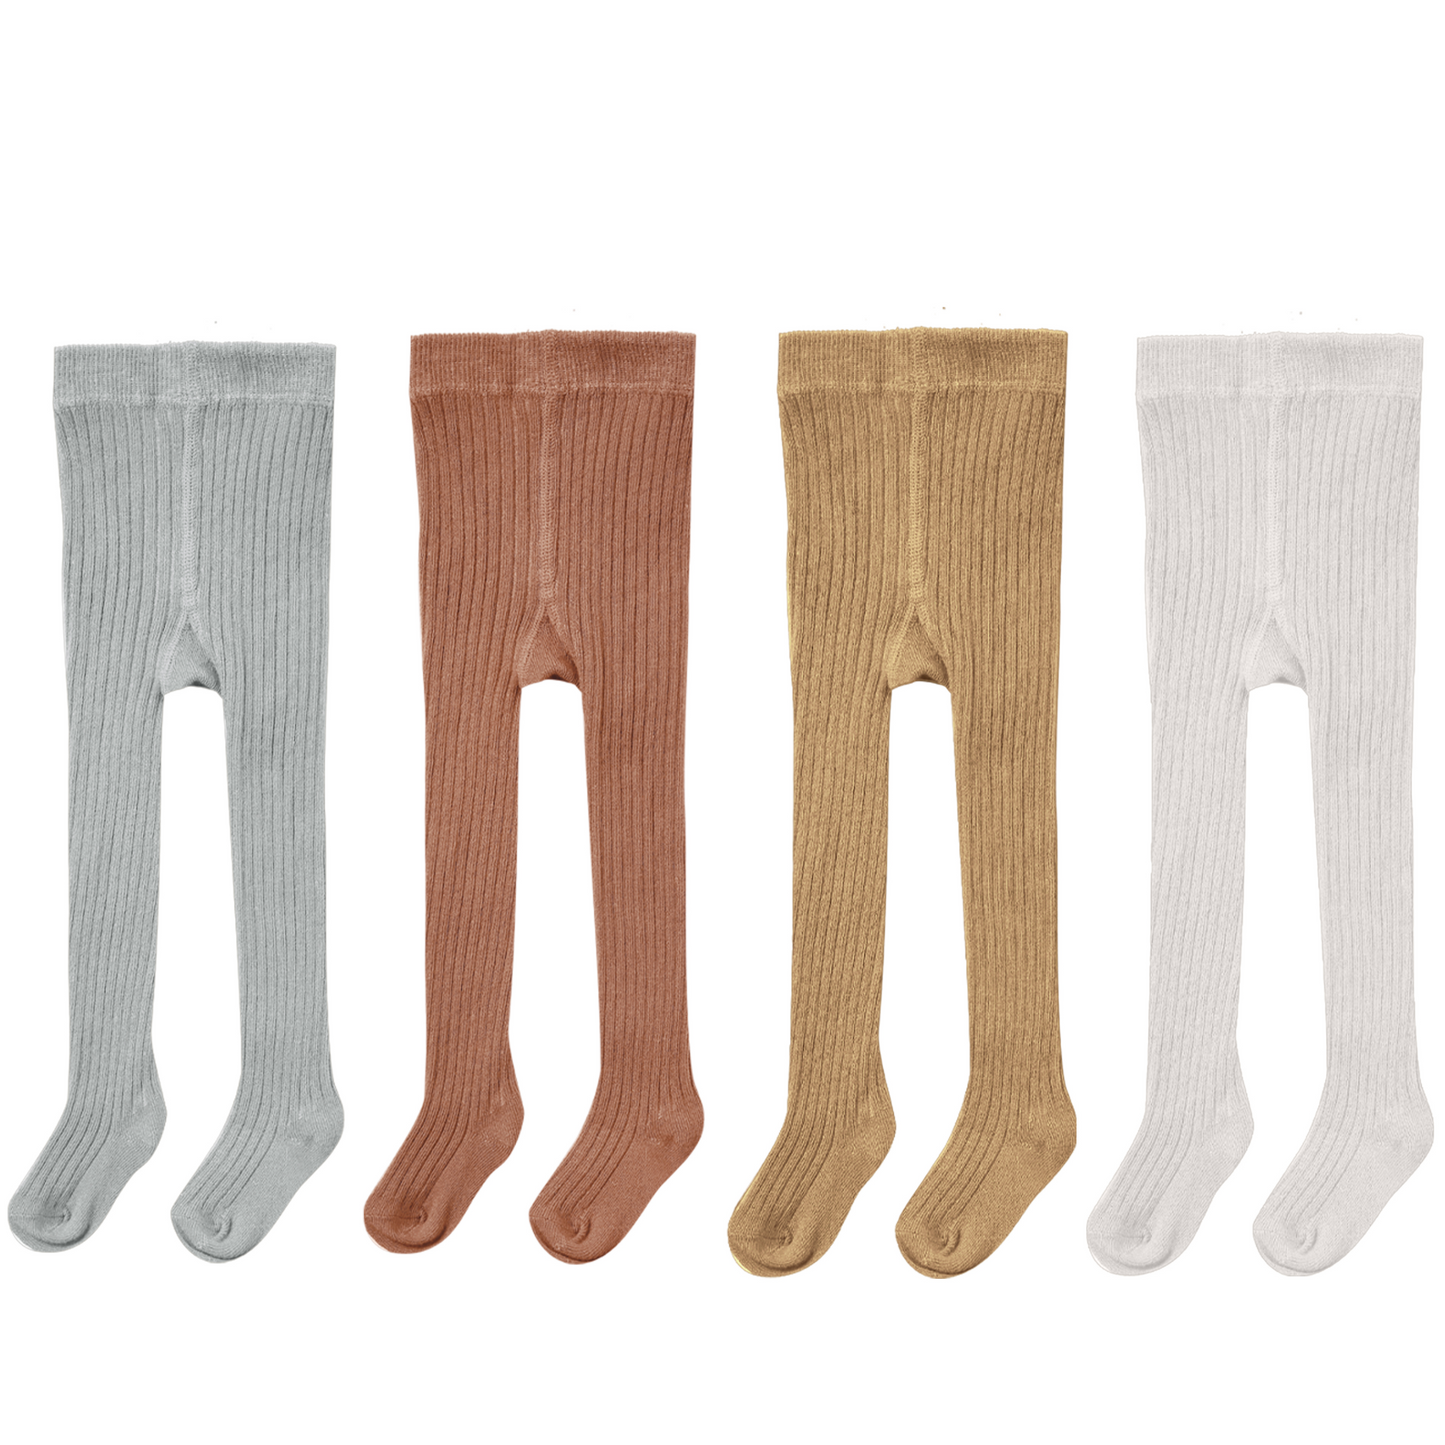 SALE - Quincy Mae Ribbed Tights - Multiple Colors Available